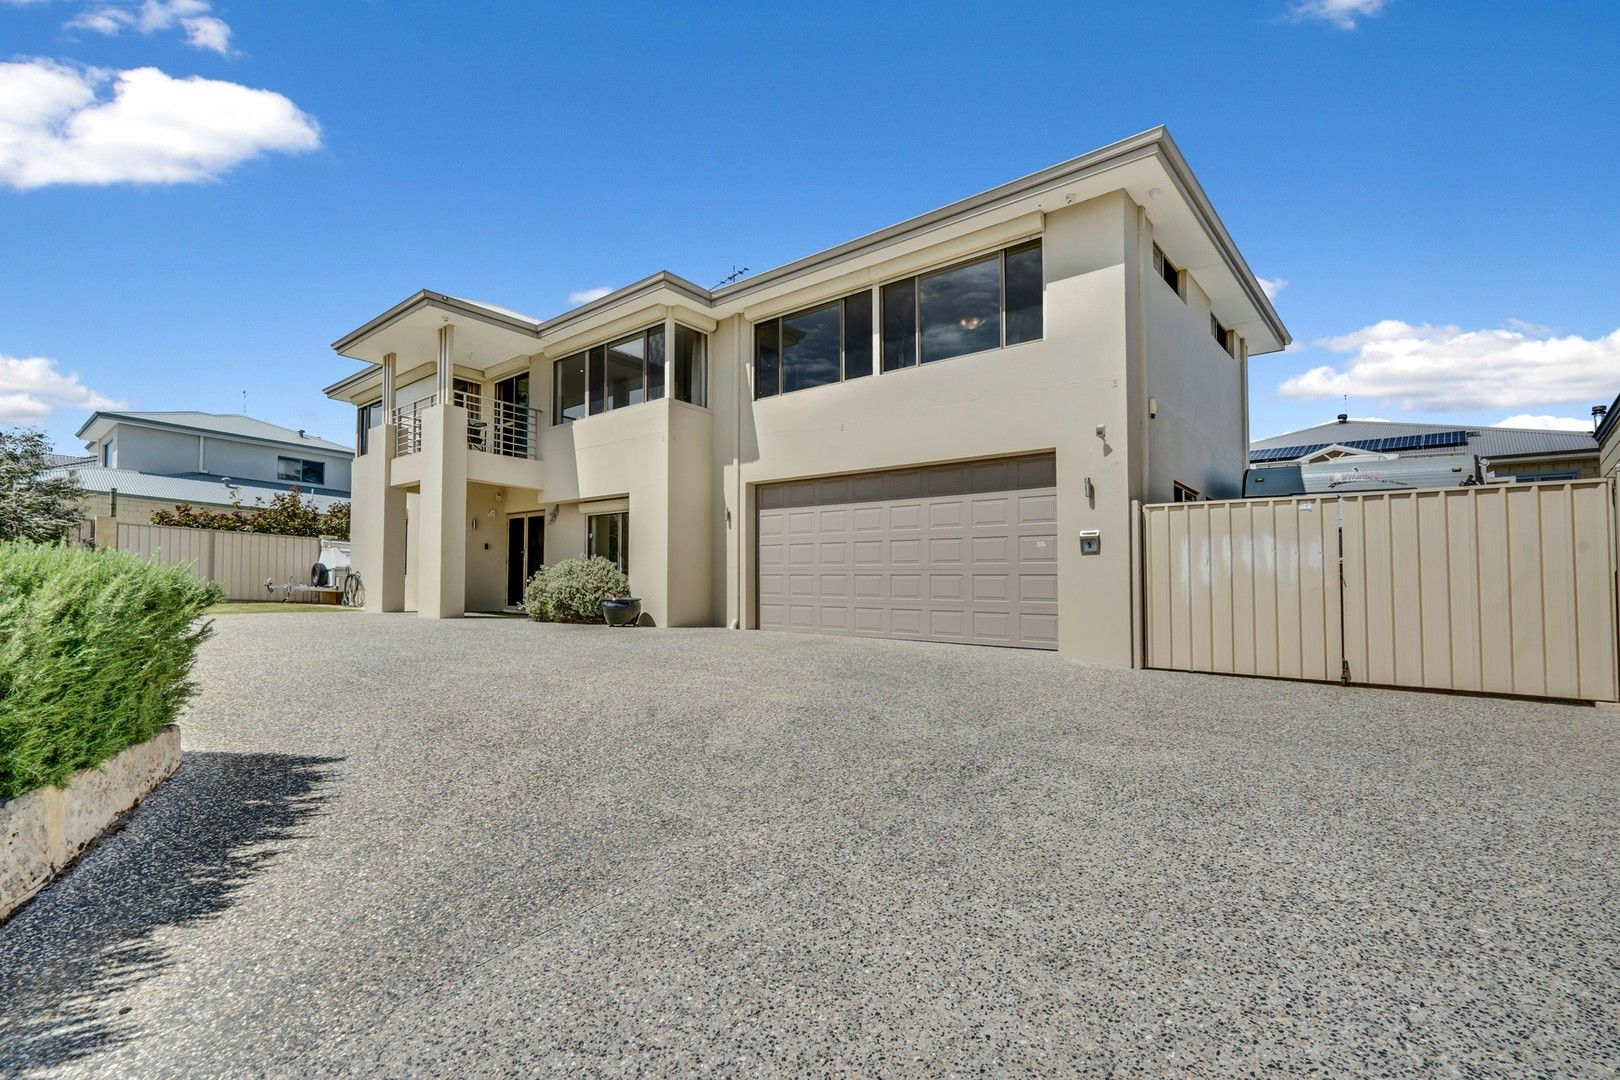 5 bedrooms House in 9 Narembeen Road DAWESVILLE WA, 6211